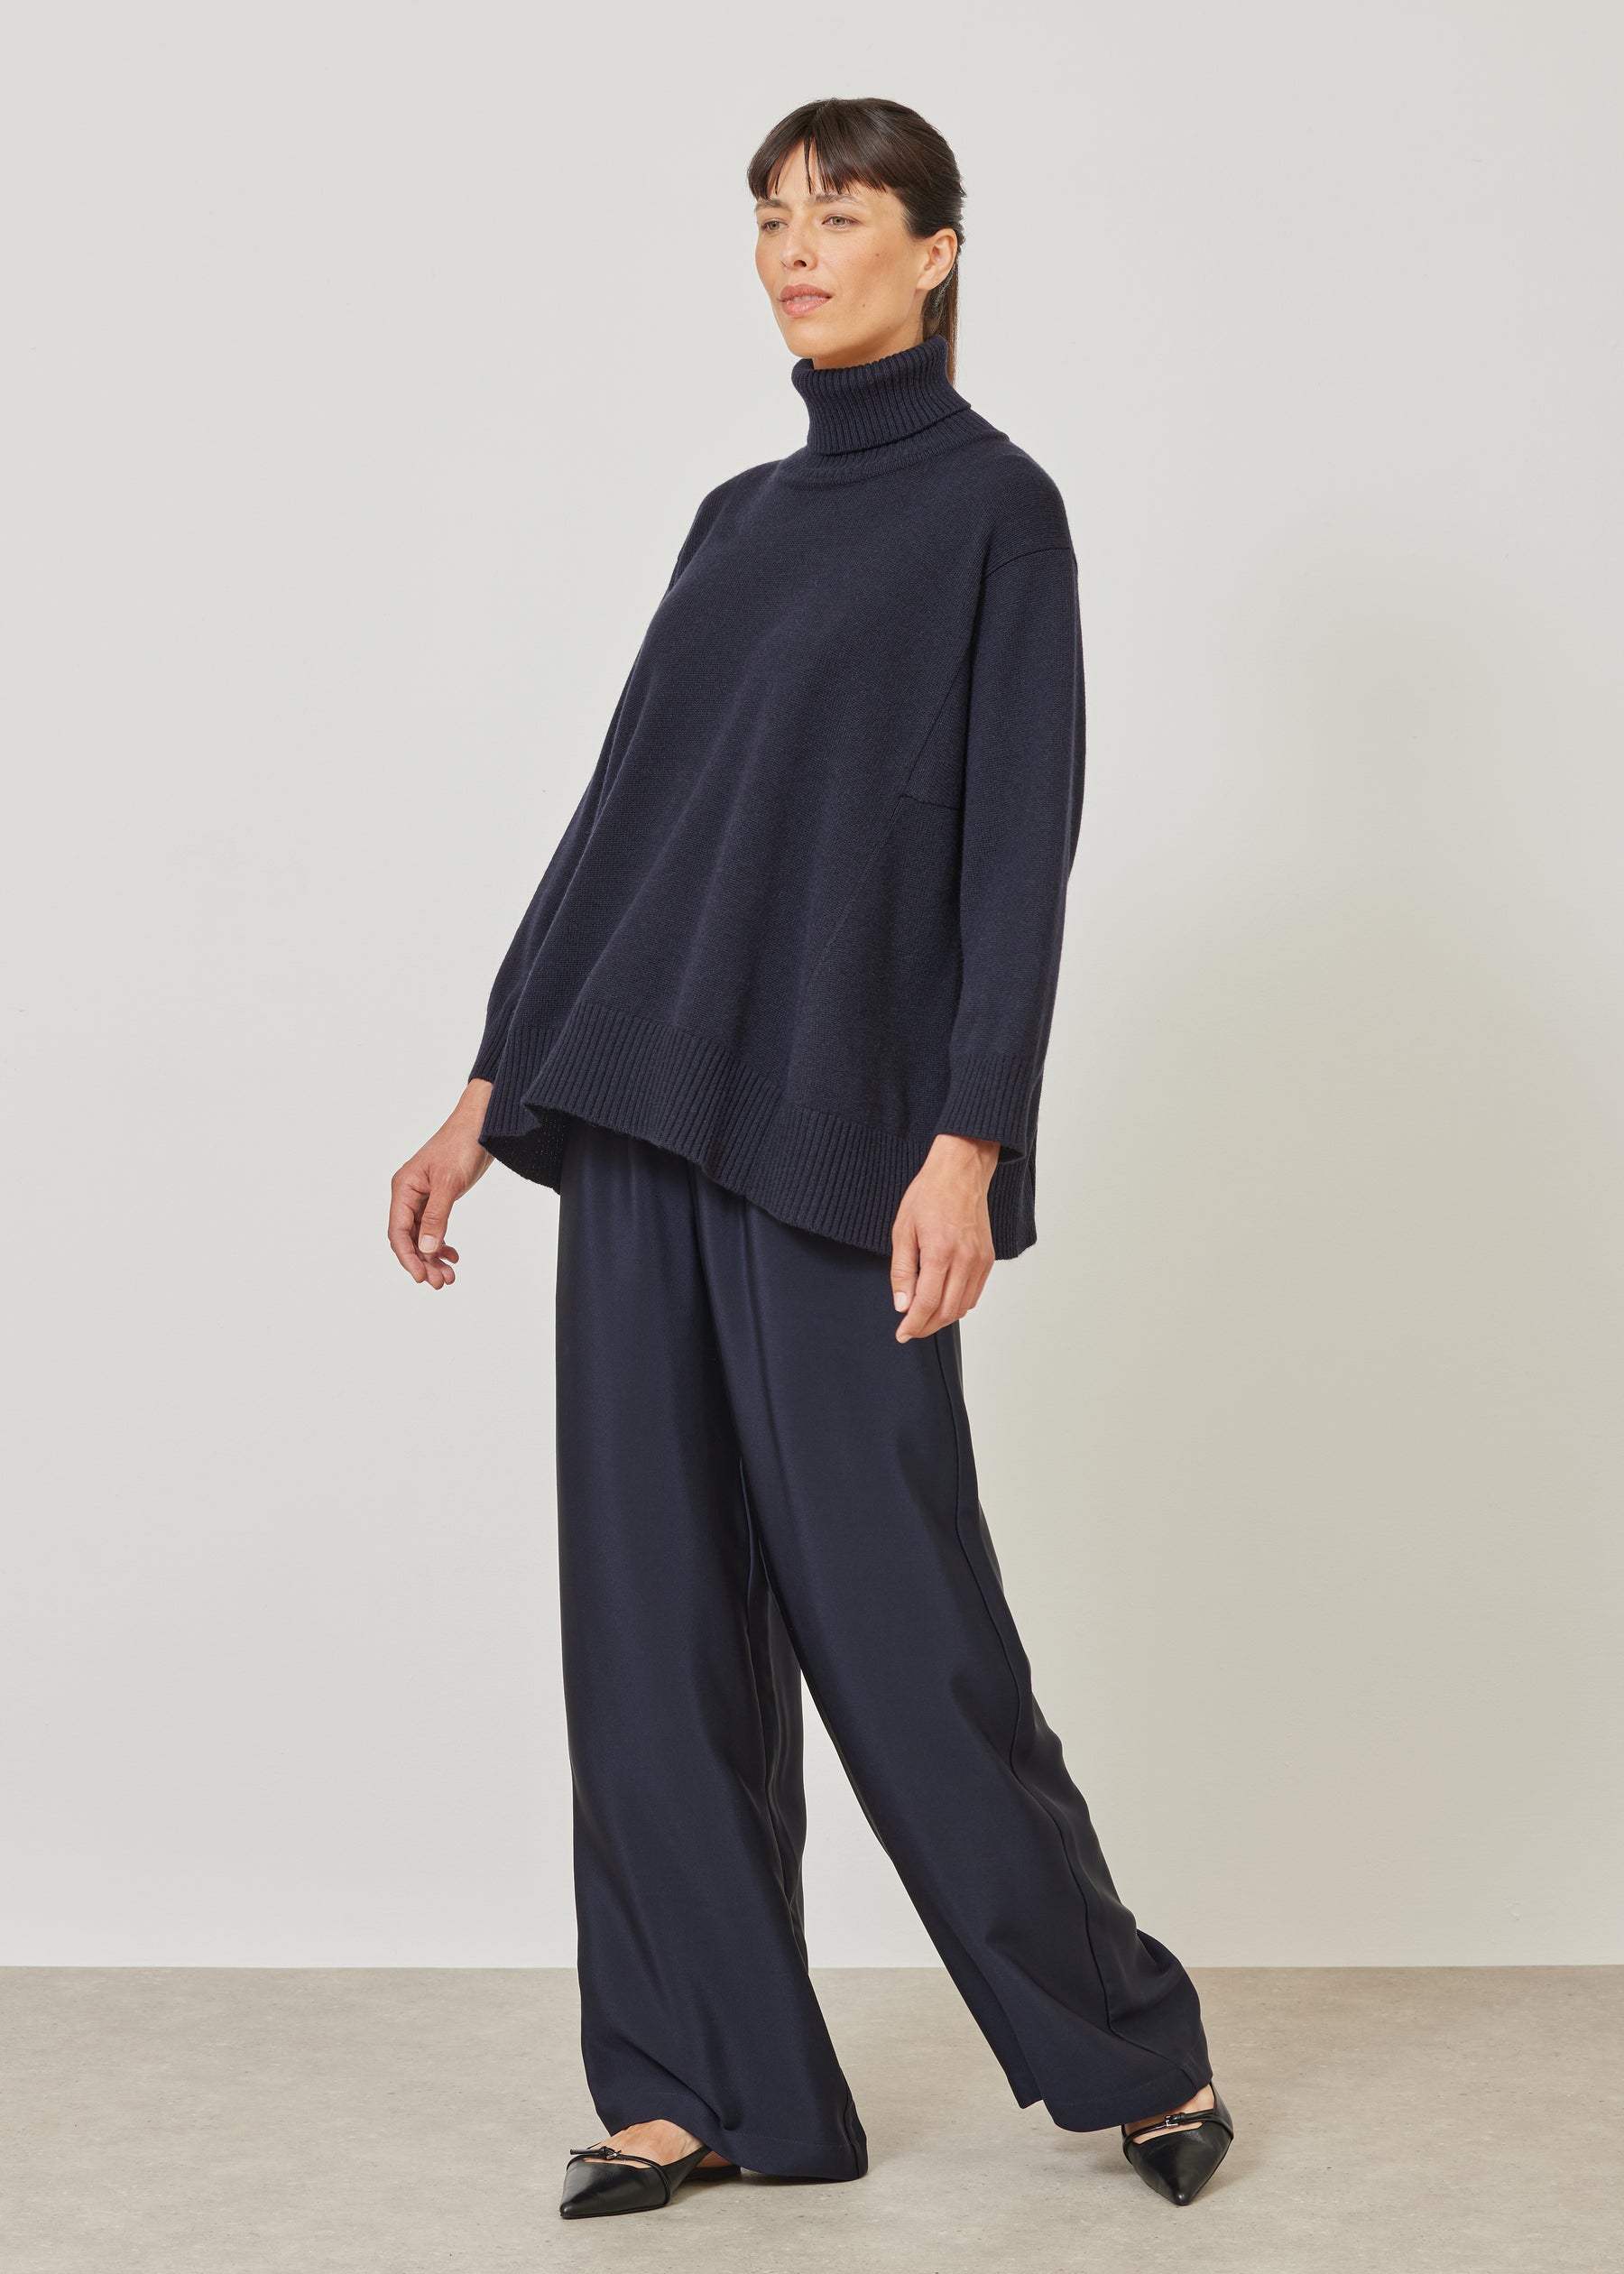 panelled A-line roll neck sweater - mid plus